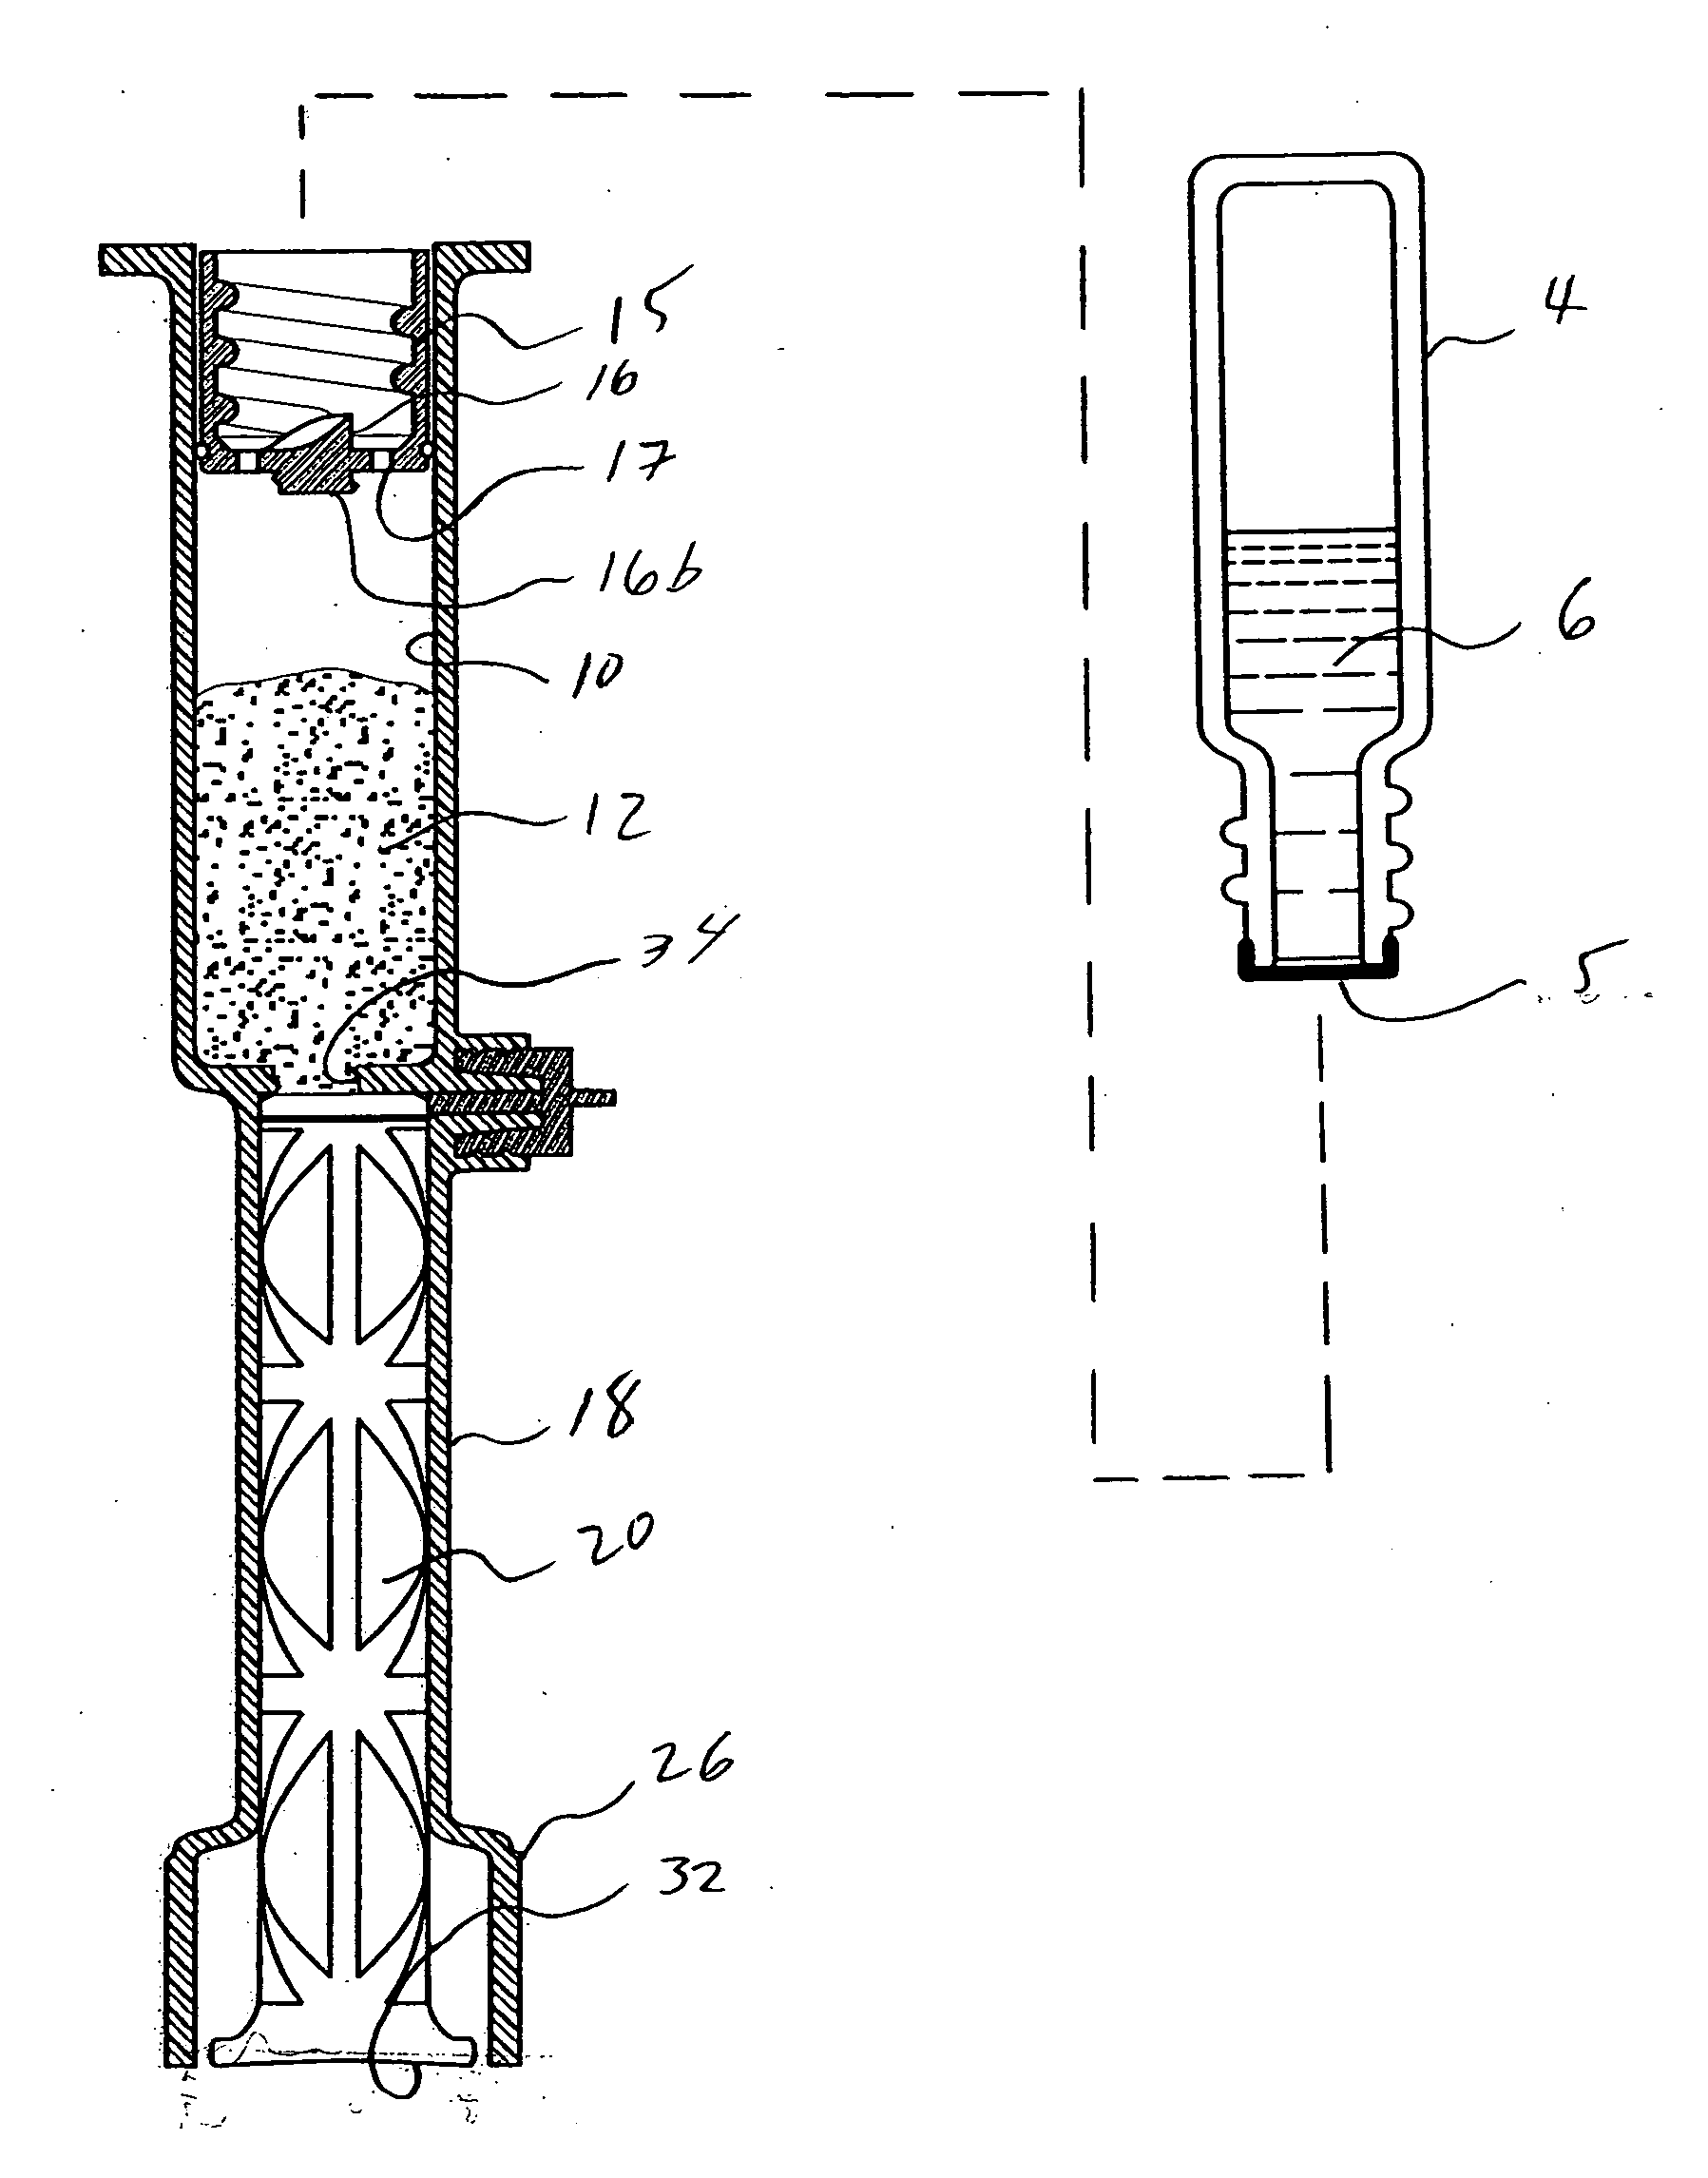 Multi-chamber integrated mixing and delivery system